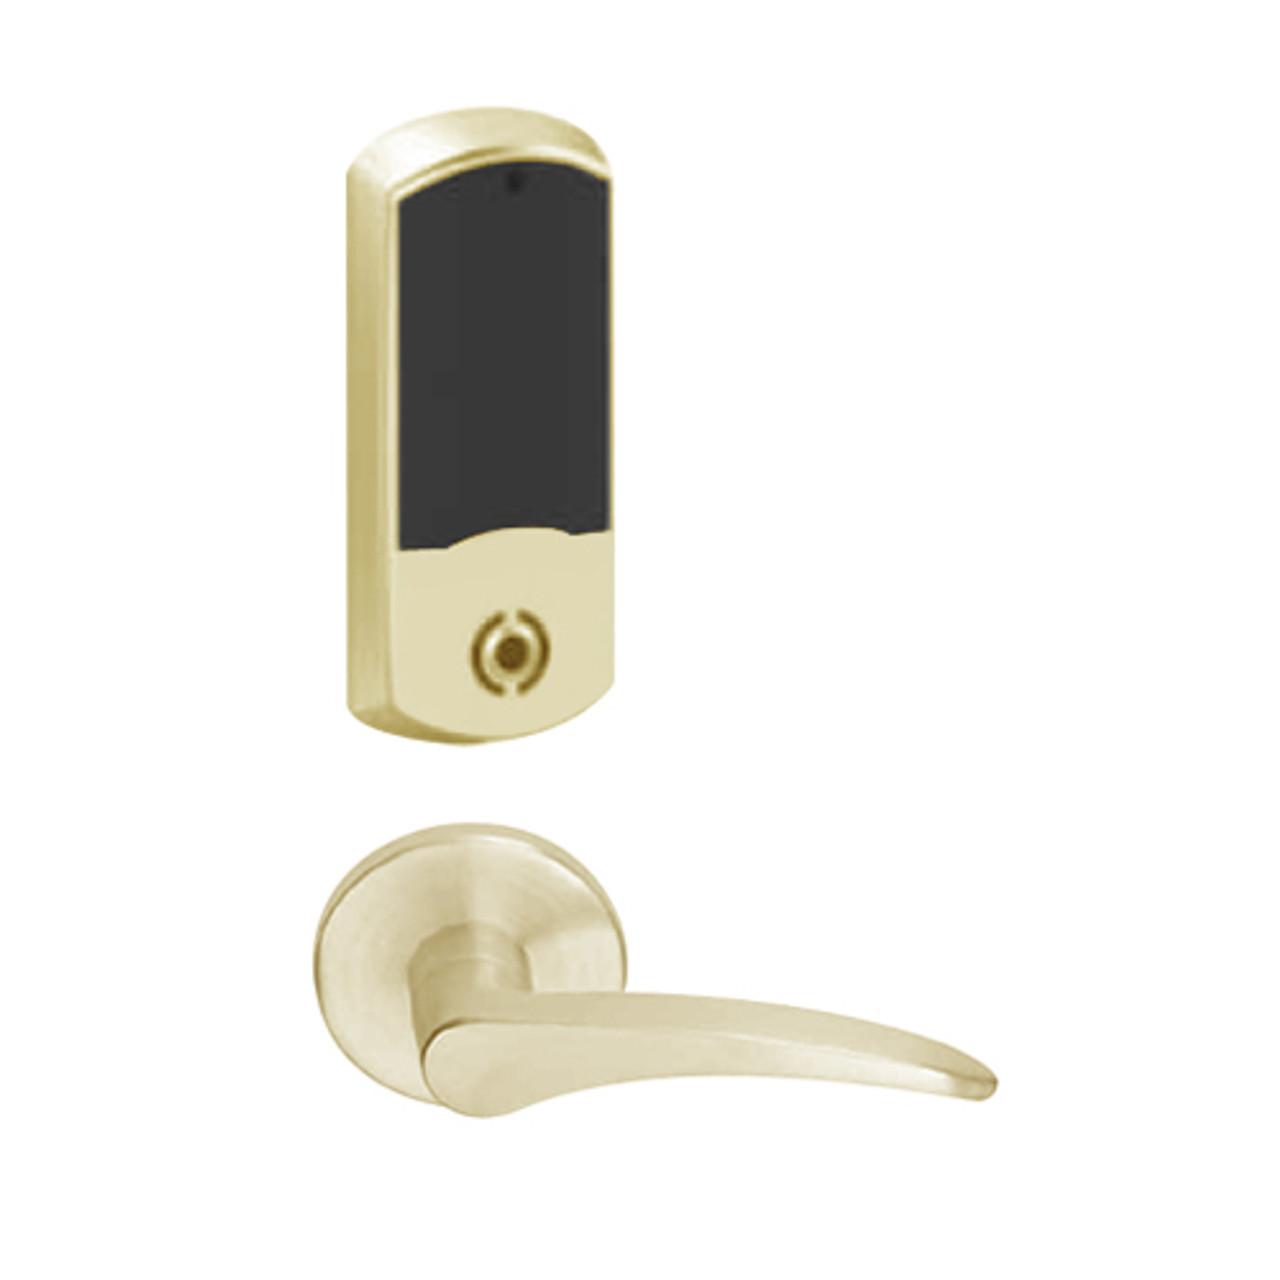 LEMS-GRW-J-12-606-00B-RH Schlage Storeroom Wireless Greenwich Mortise Lock with LED Indicator and 12 Lever Prepped for FSIC in Satin Brass